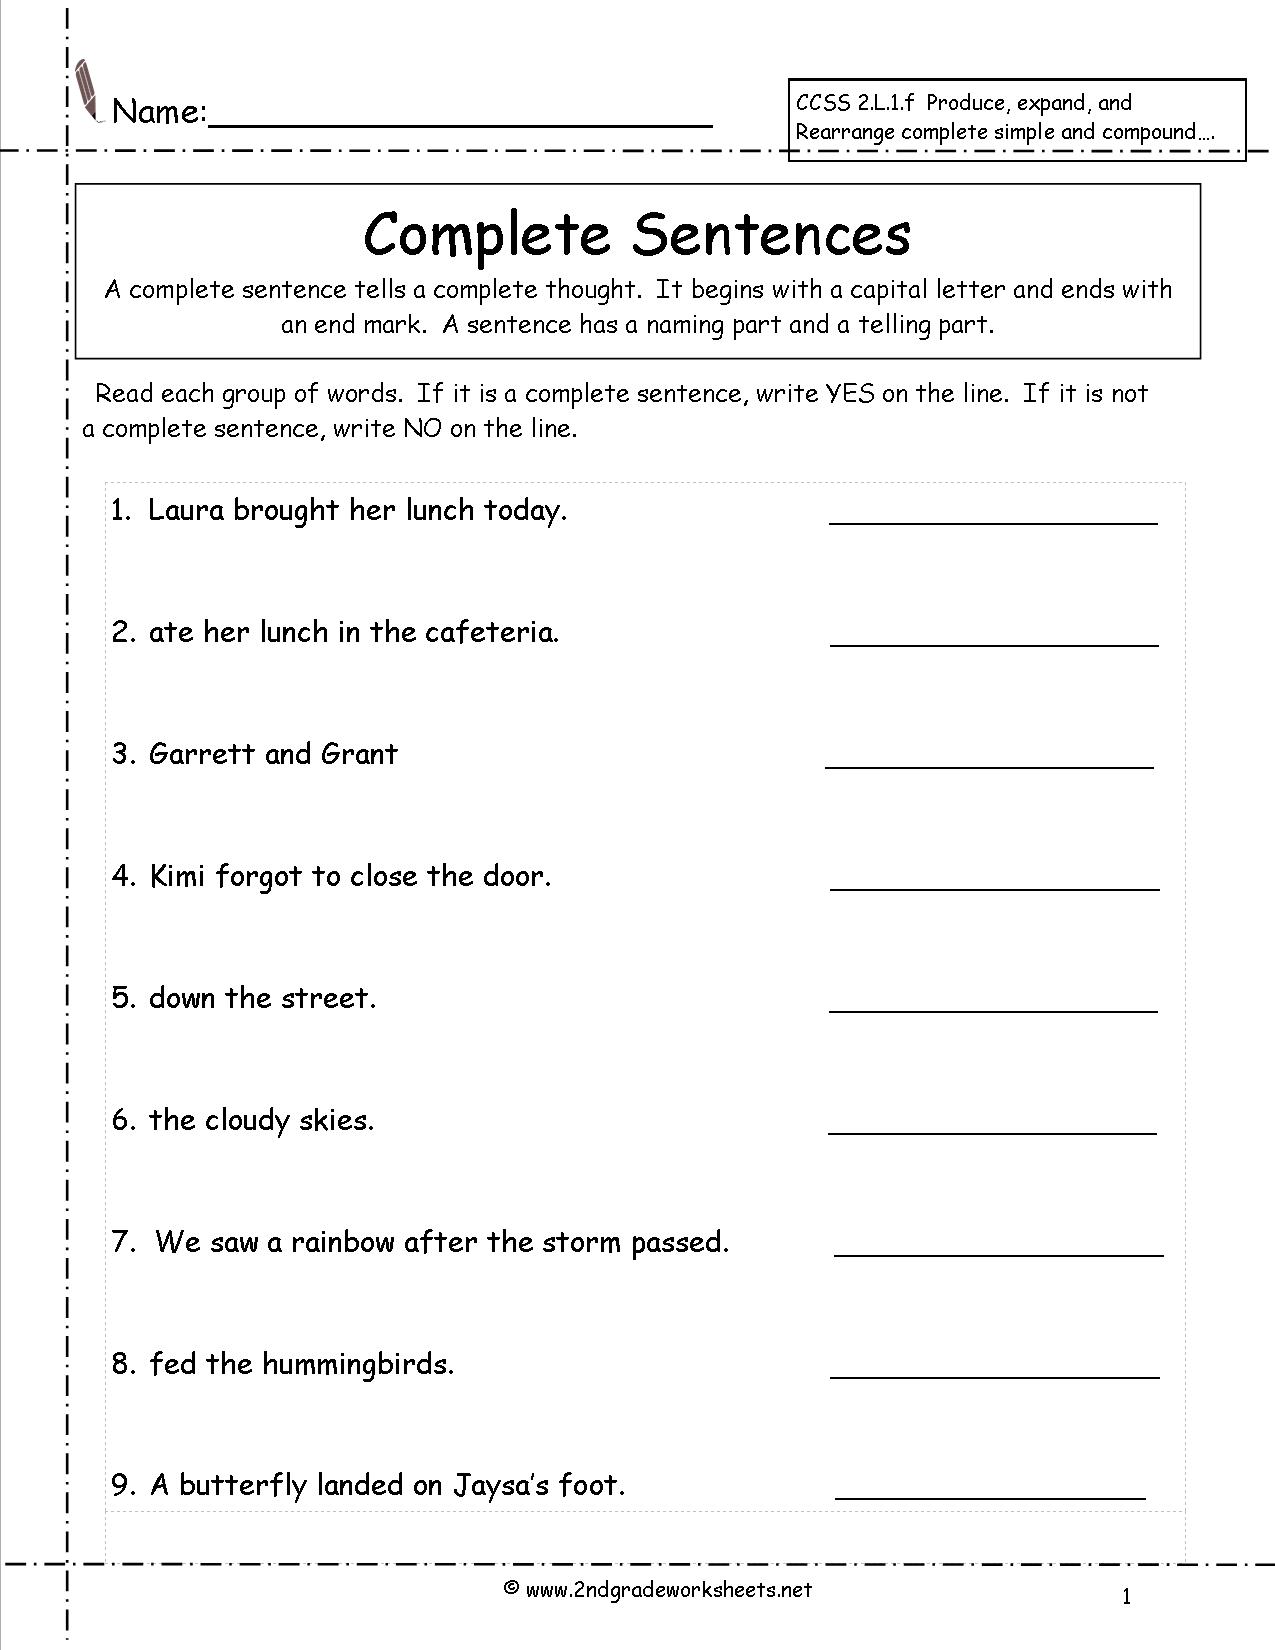 12-best-images-of-2nd-grade-compound-words-worksheets-second-grade-compound-words-worksheets